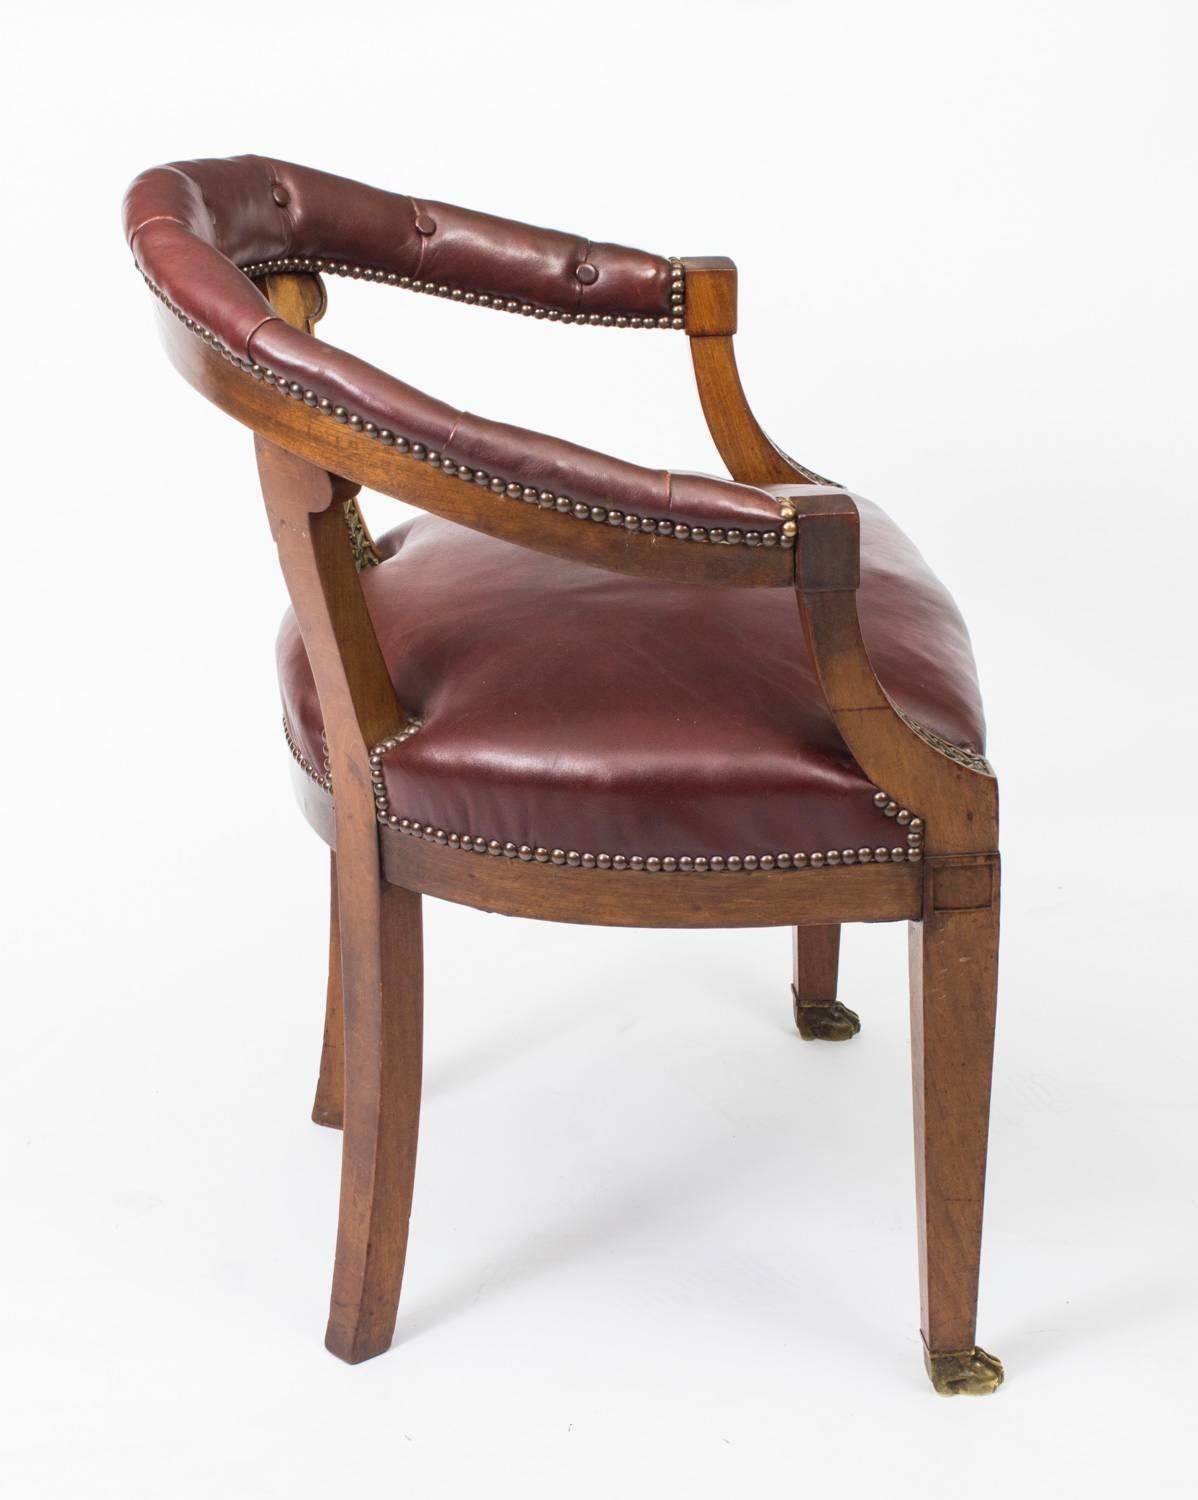 This is a beautiful antique French mahogany second empire 